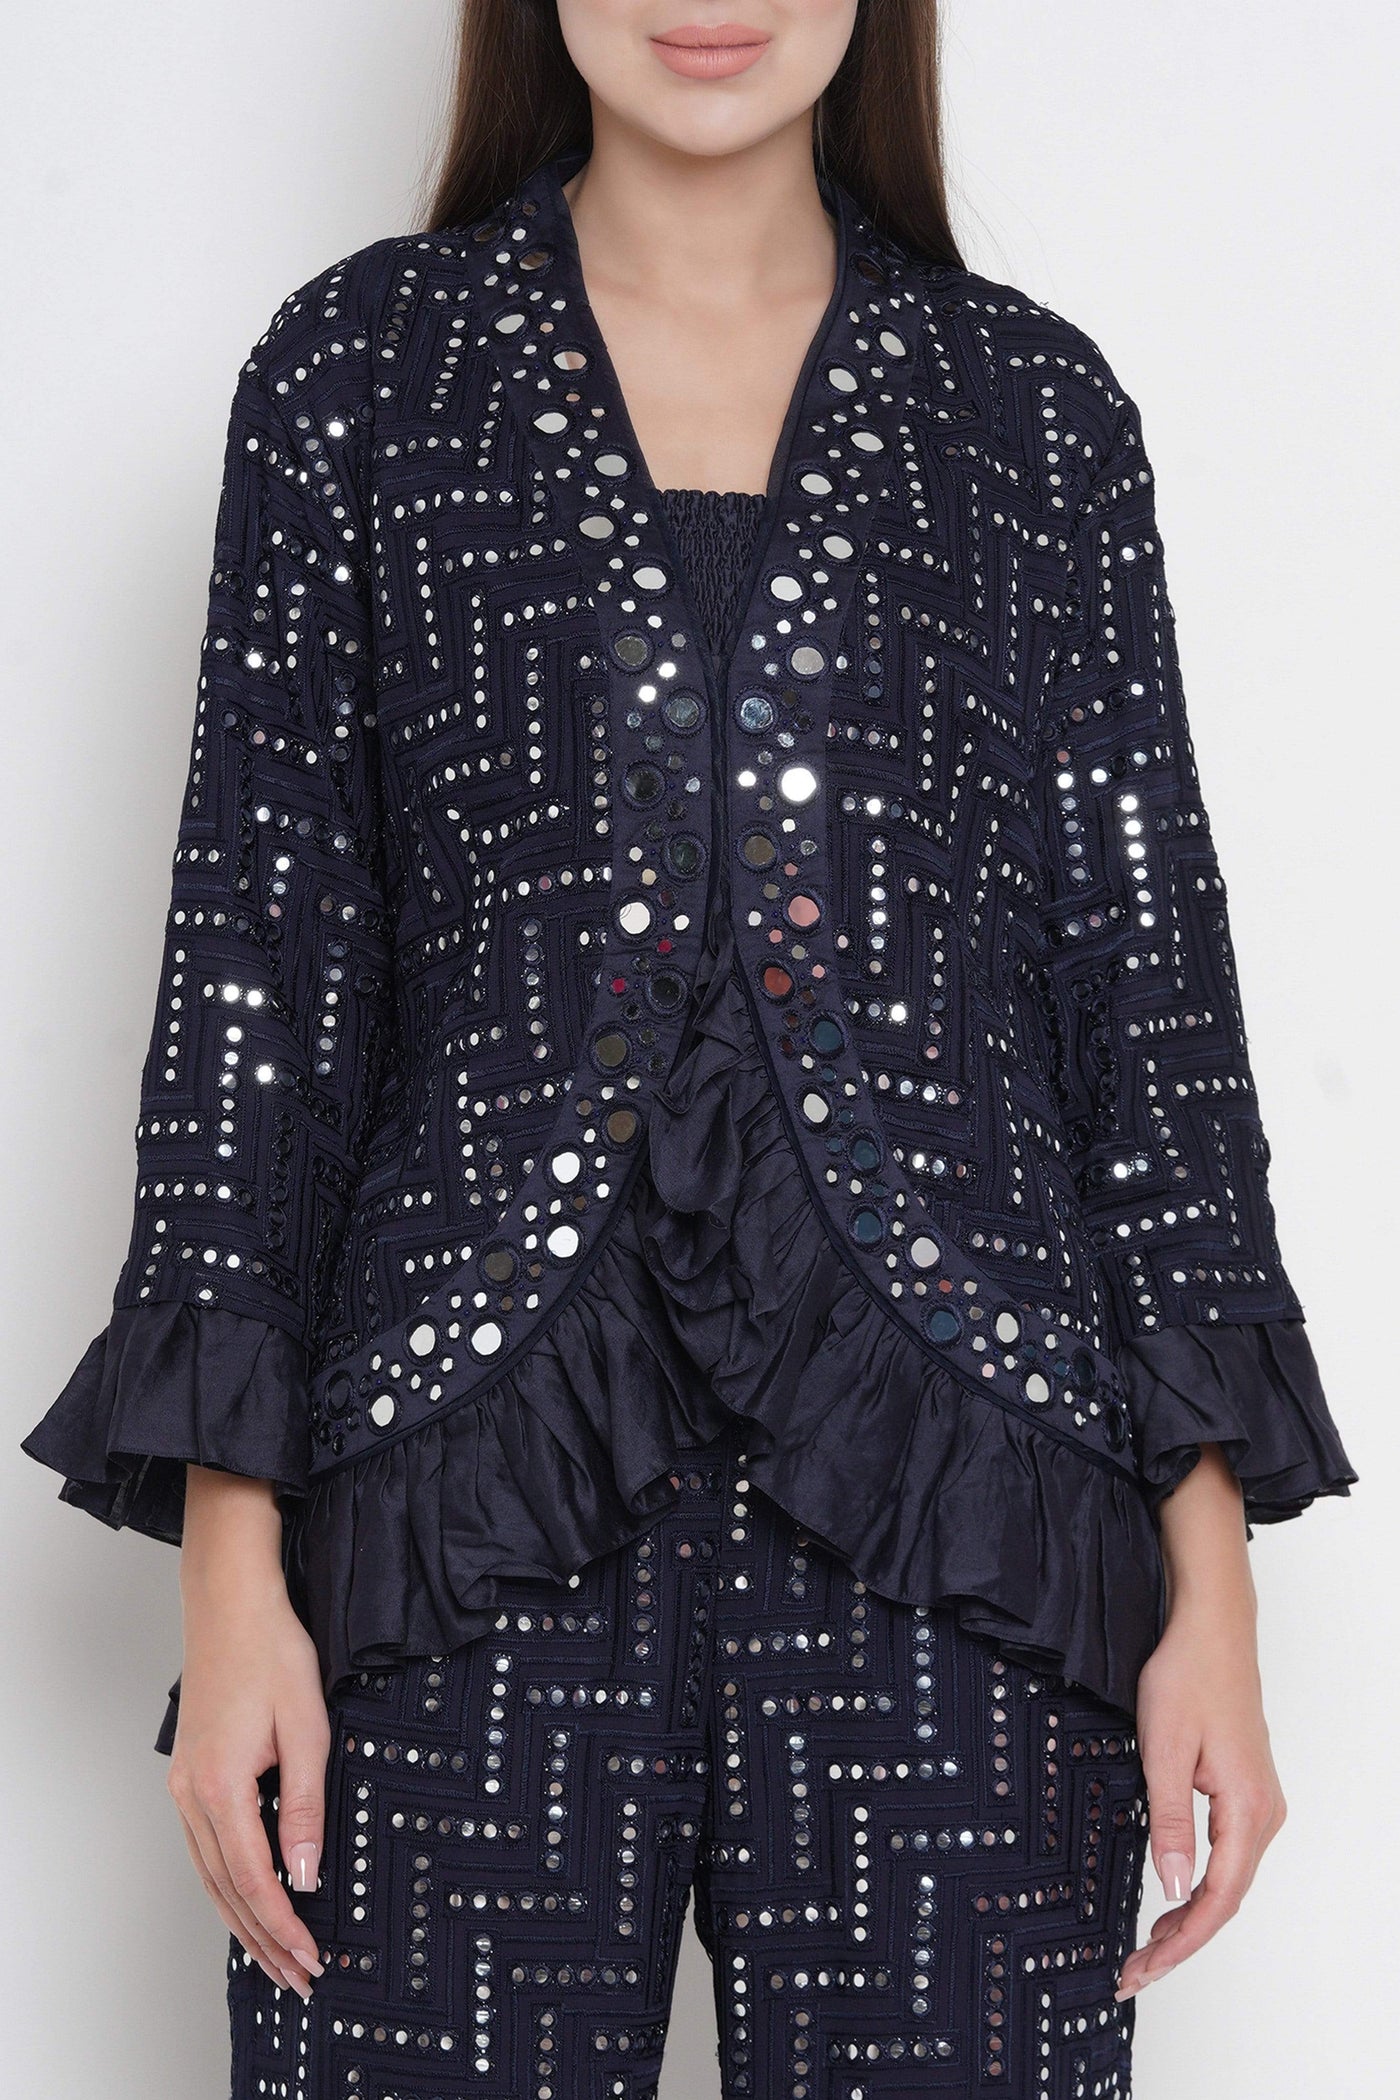 Mirror Embellished Jacket With Frill